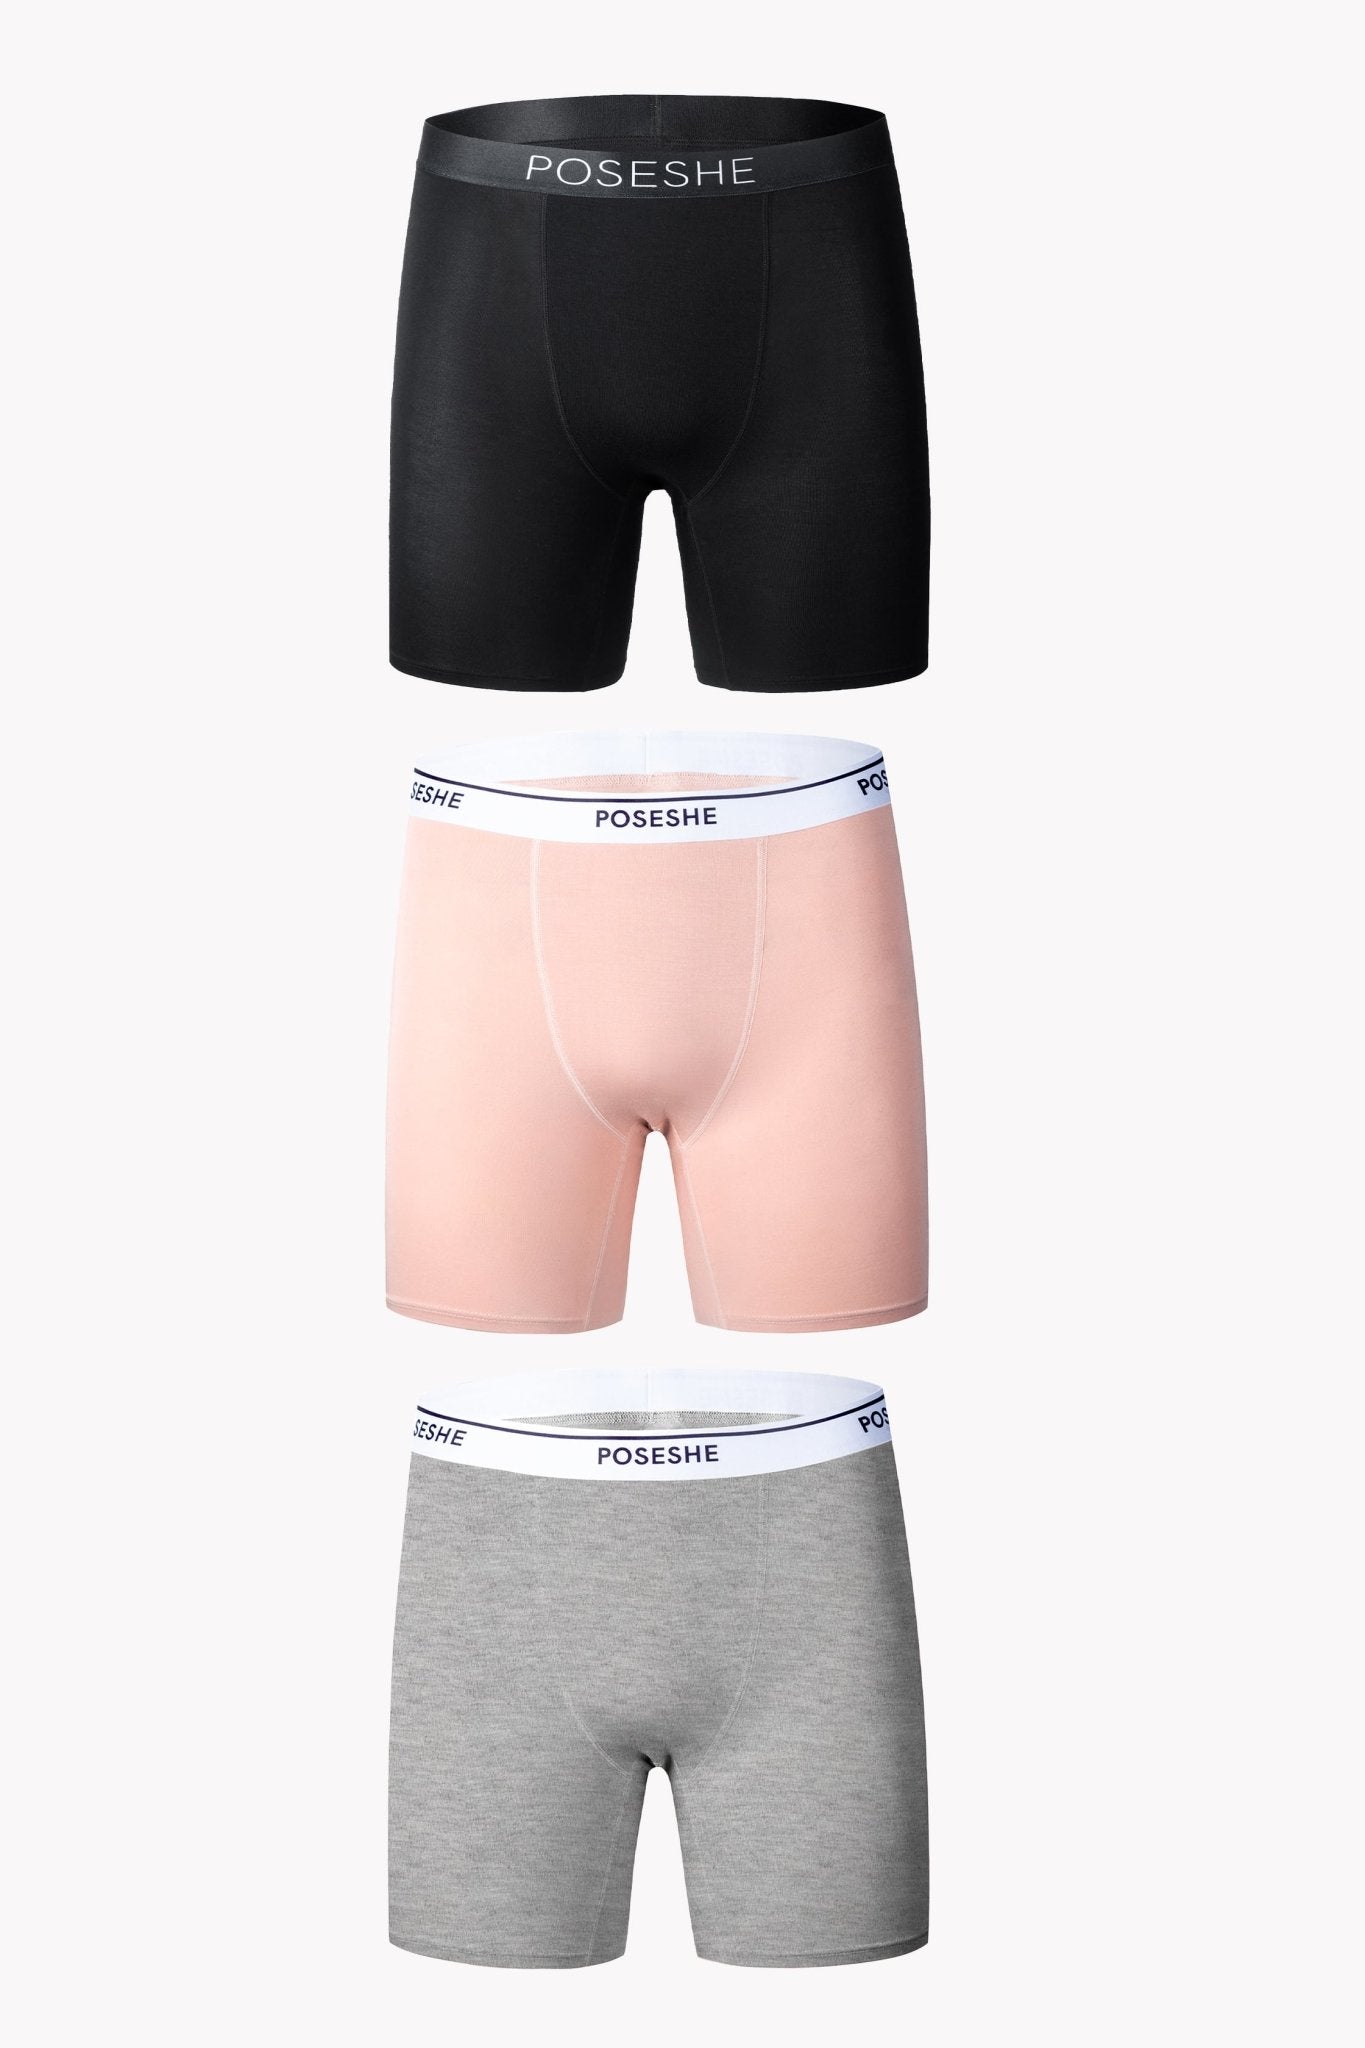 Body Liberator High-Waisted Boxer Briefs (Period Friendly) 3 Pack - POSESHE